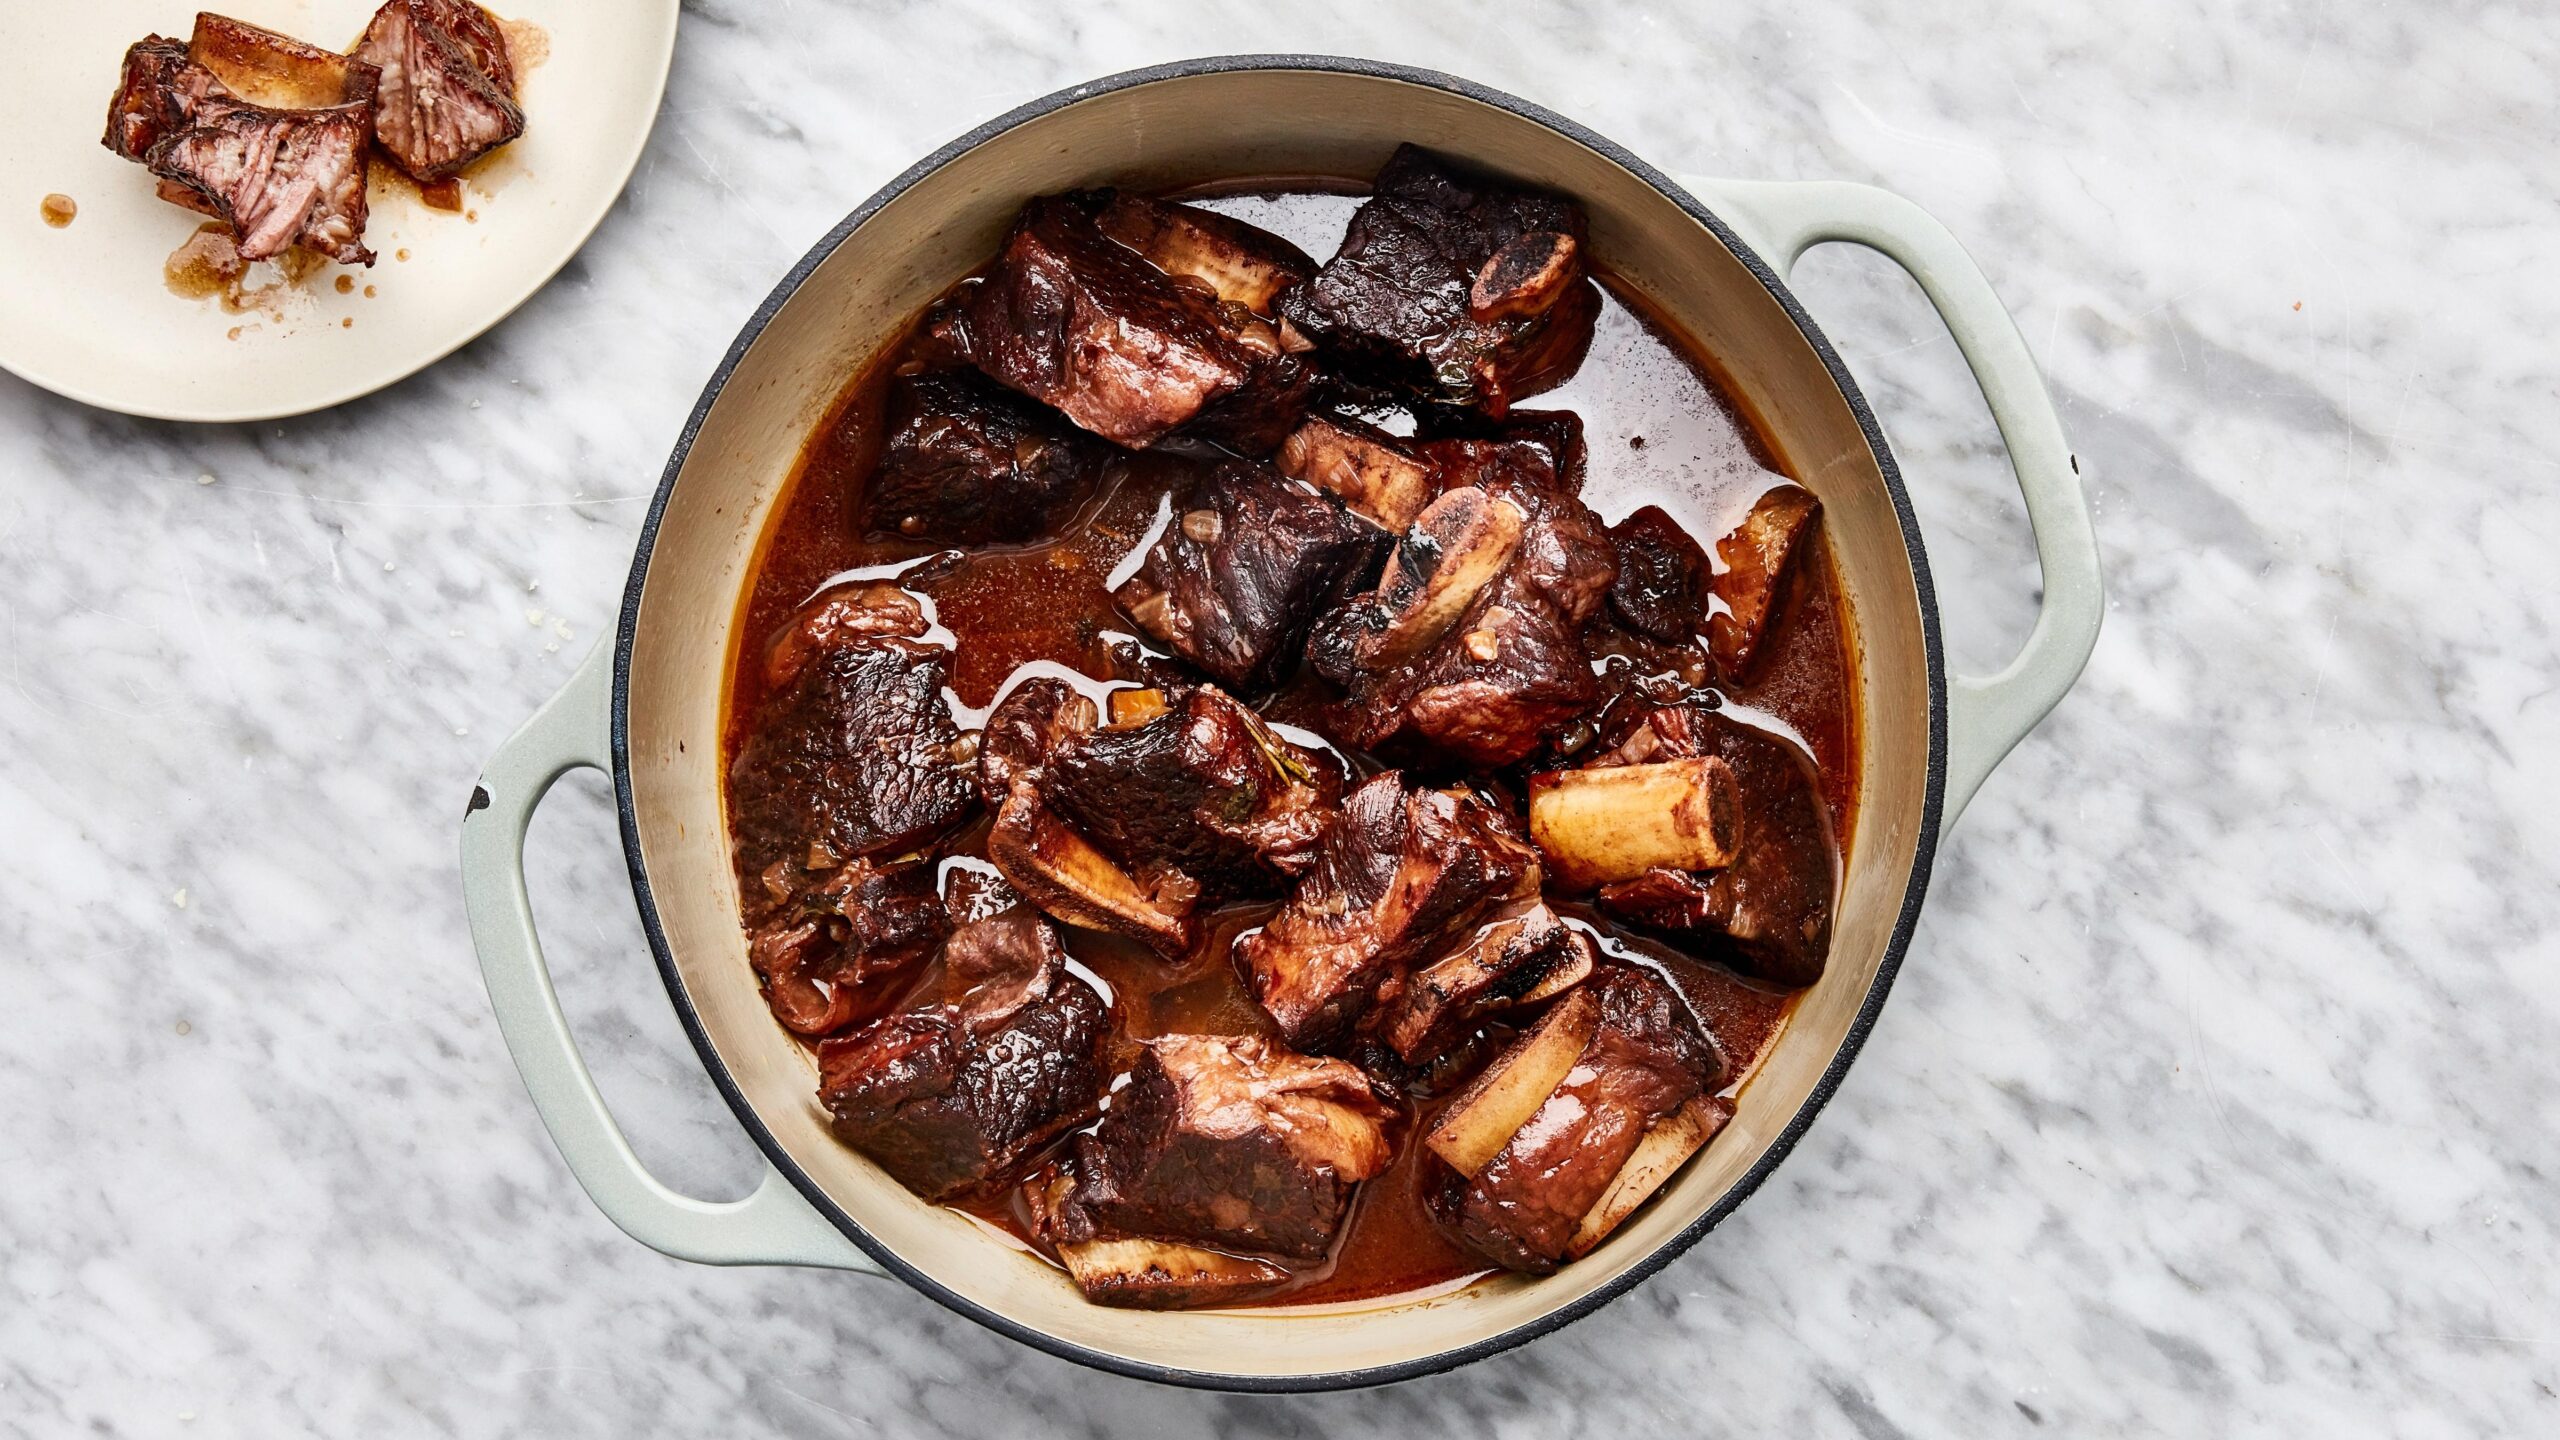  Red Wine Braised Short Rib: a mouth-watering, fall-off-the-bone dish that will make your taste buds sing.